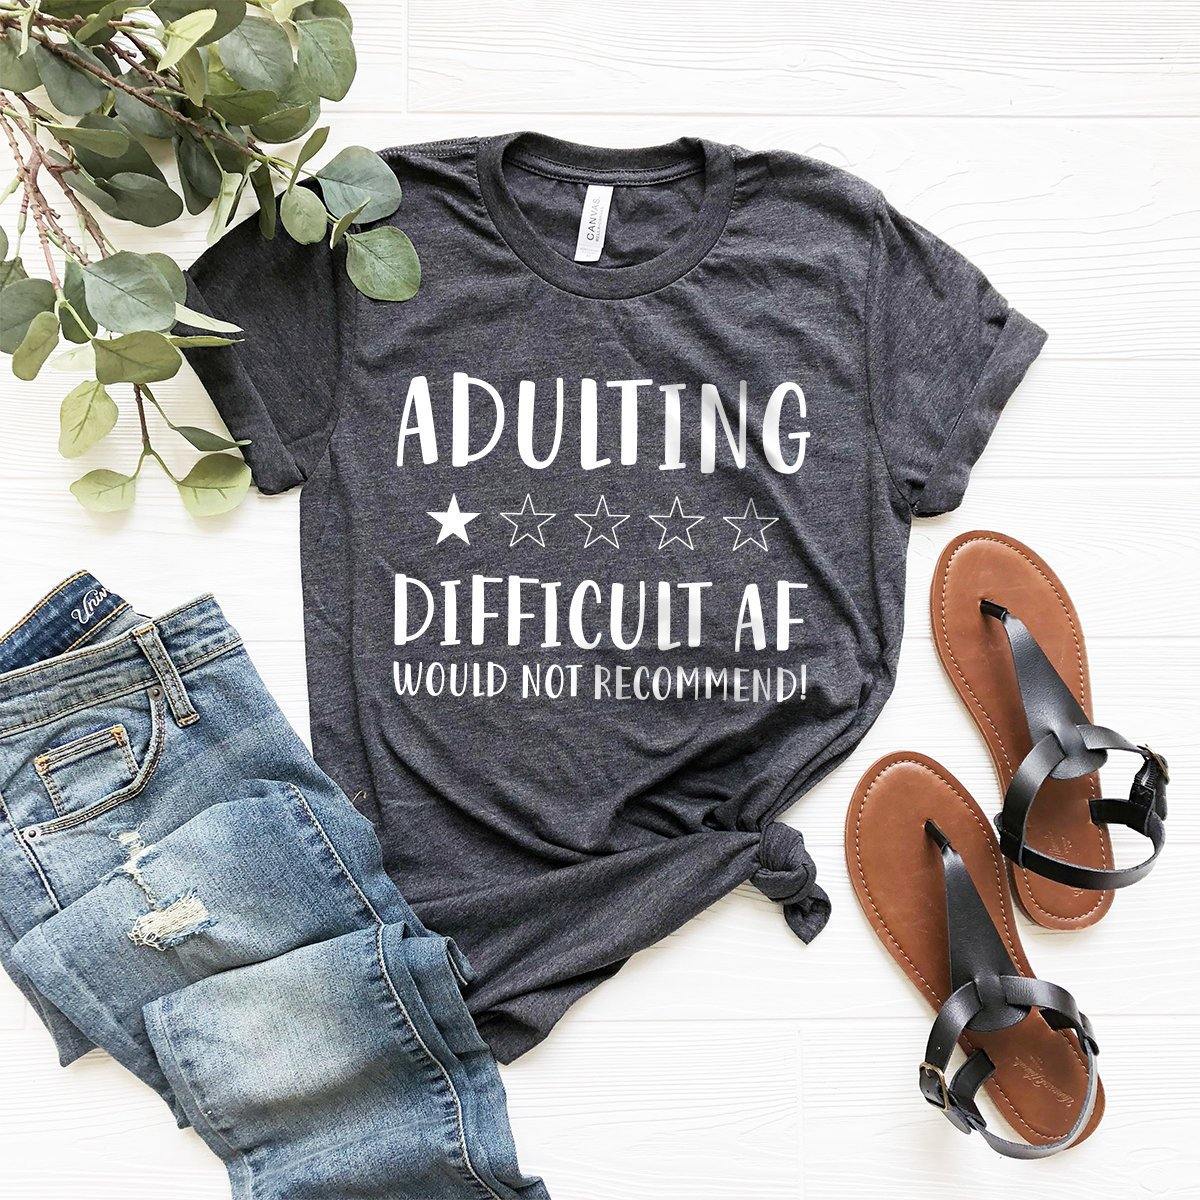 Funny Adult Tee, Adulting Difficult Af Shirt, Adulting Tshirt, Mom Life Shirt, Mom Shirt, Quarantine Shirt, Mom T-Shirt, Adulting Life Shirt - Fastdeliverytees.com